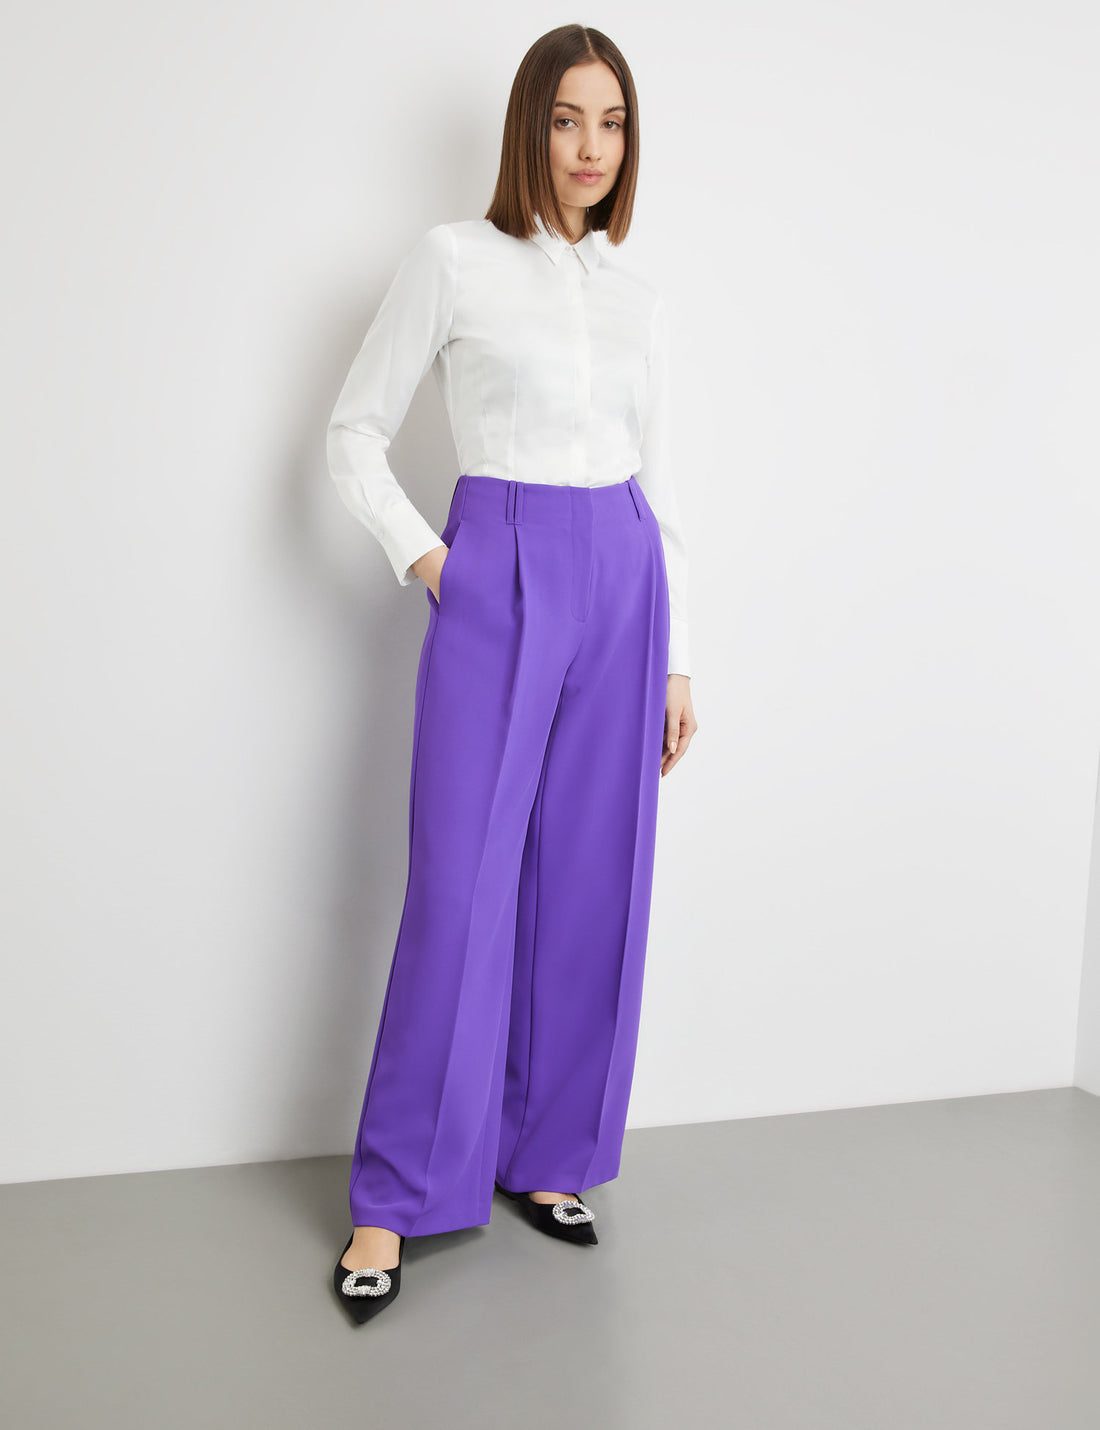 Elegant Wide-Leg Trousers Made Of Stretch Fabric_520303-11054_8810_01